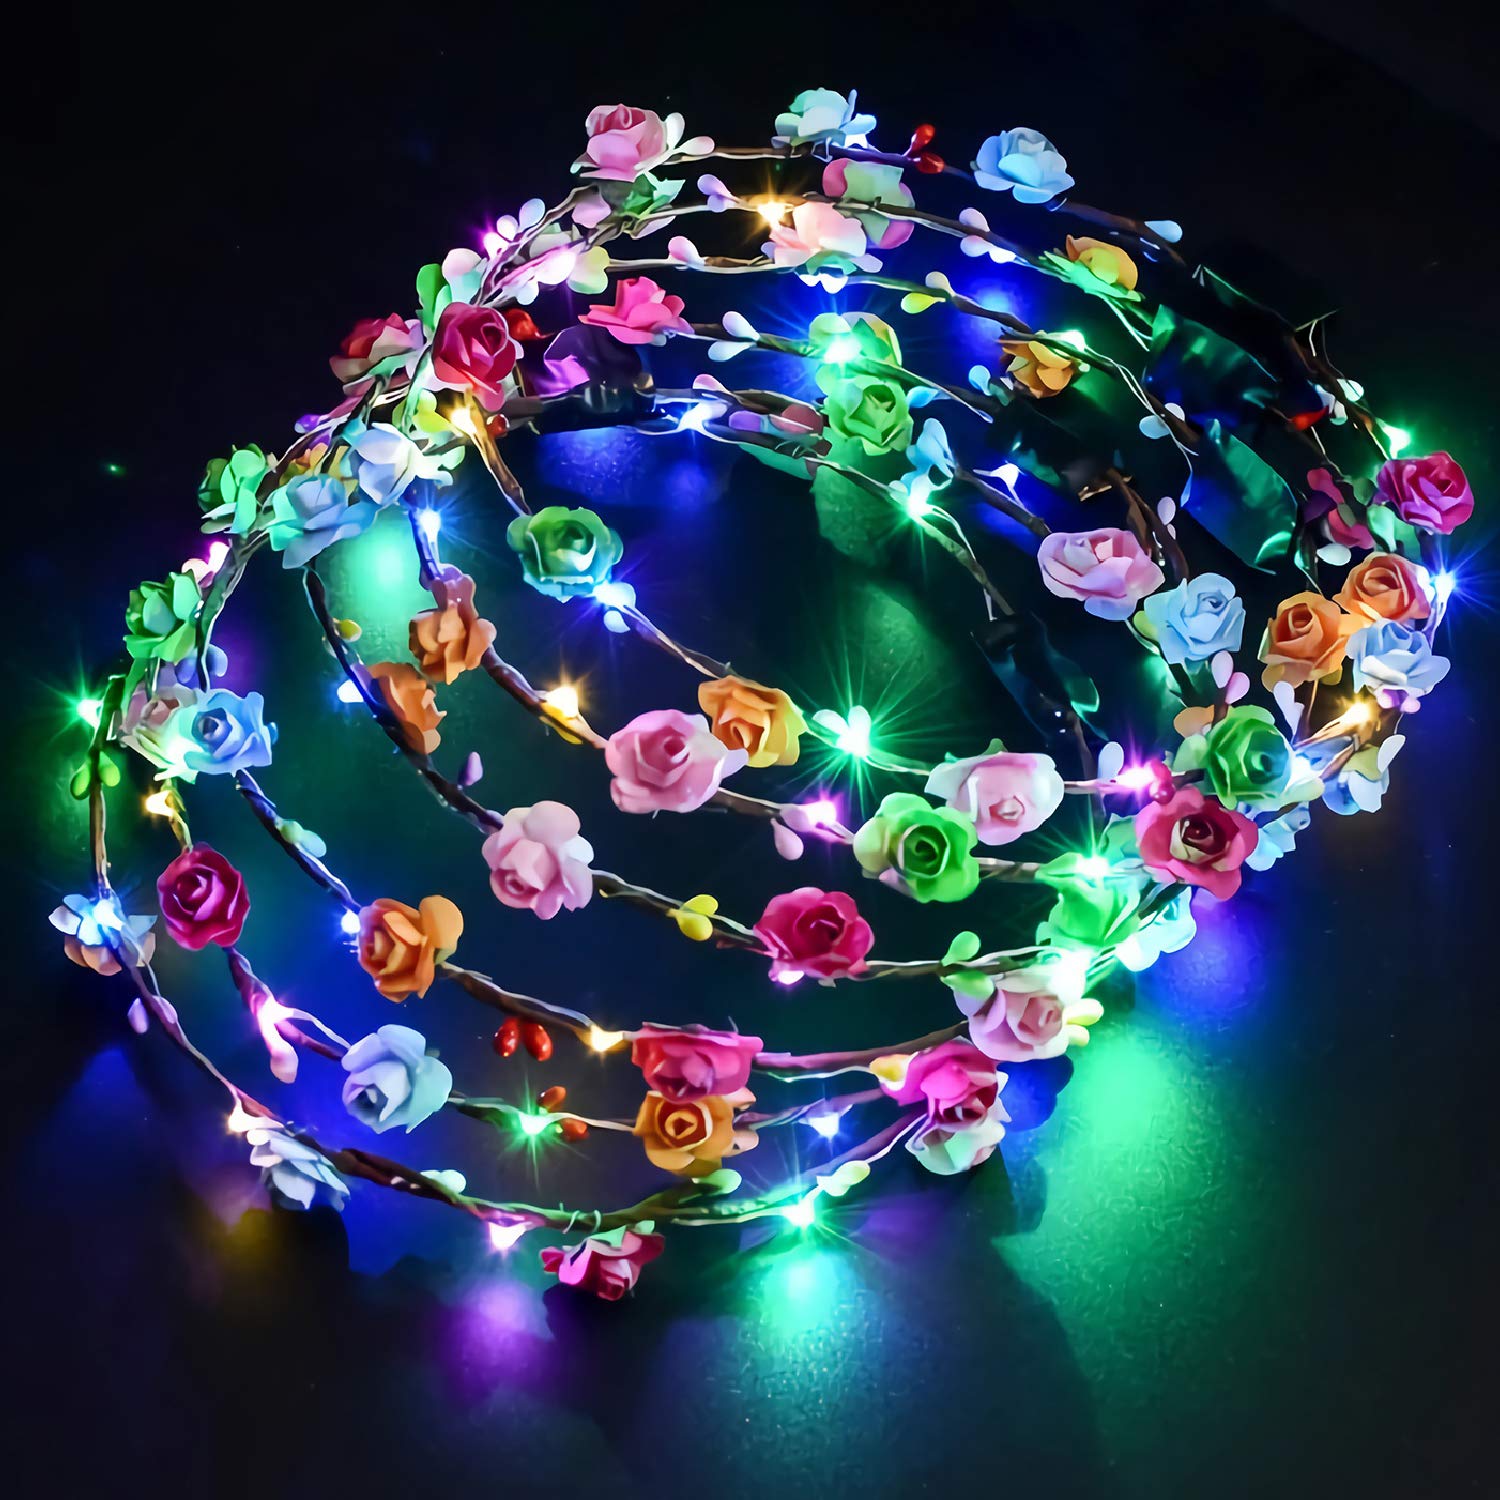 PTHTECHUS 12 Pcs LED Flower Headband Light Up, 20 Hours Works Led Floral Headbands, Include 10 Paper Flowers and 10 Led Light Up Floral Headbands or Holiday Christmas Halloween Party